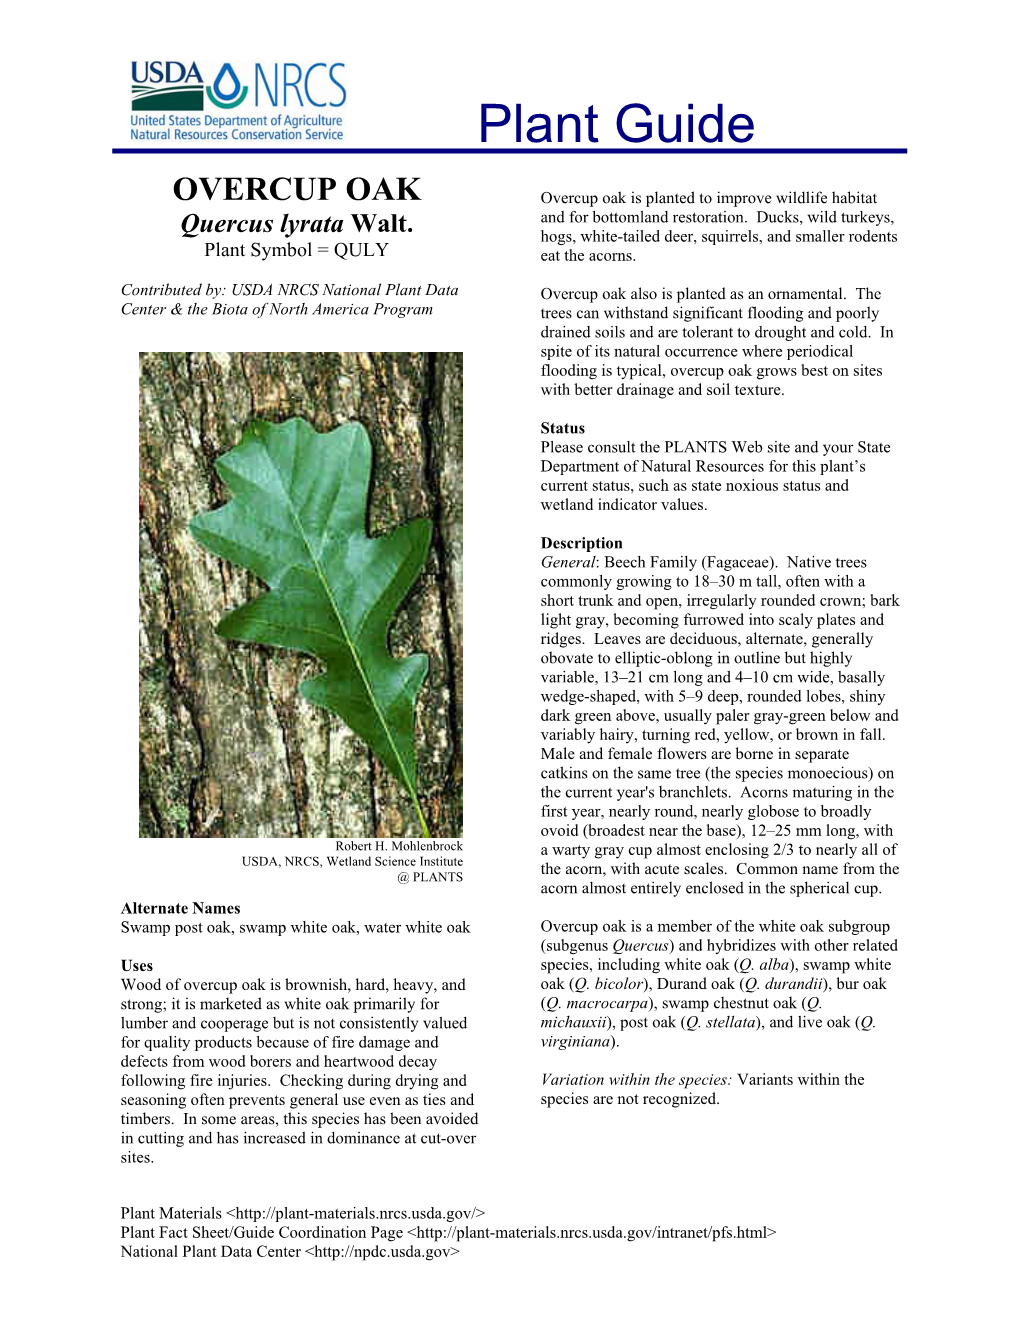 OVERCUP OAK Overcup Oak Is Planted to Improve Wildlife Habitat and for Bottomland Restoration